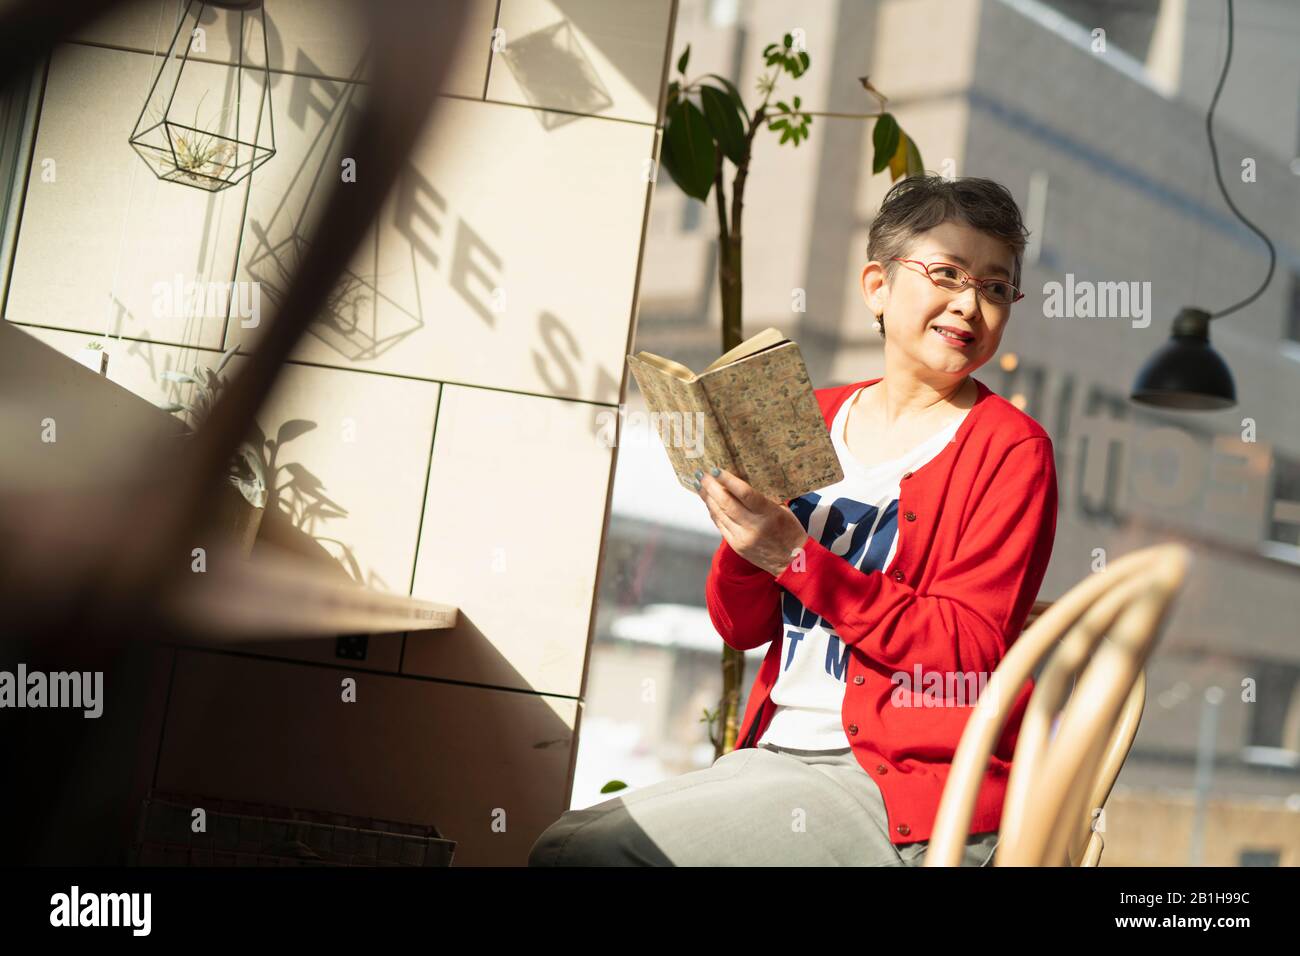 Smiling senior woman looking over shoulder with book Stock Photo